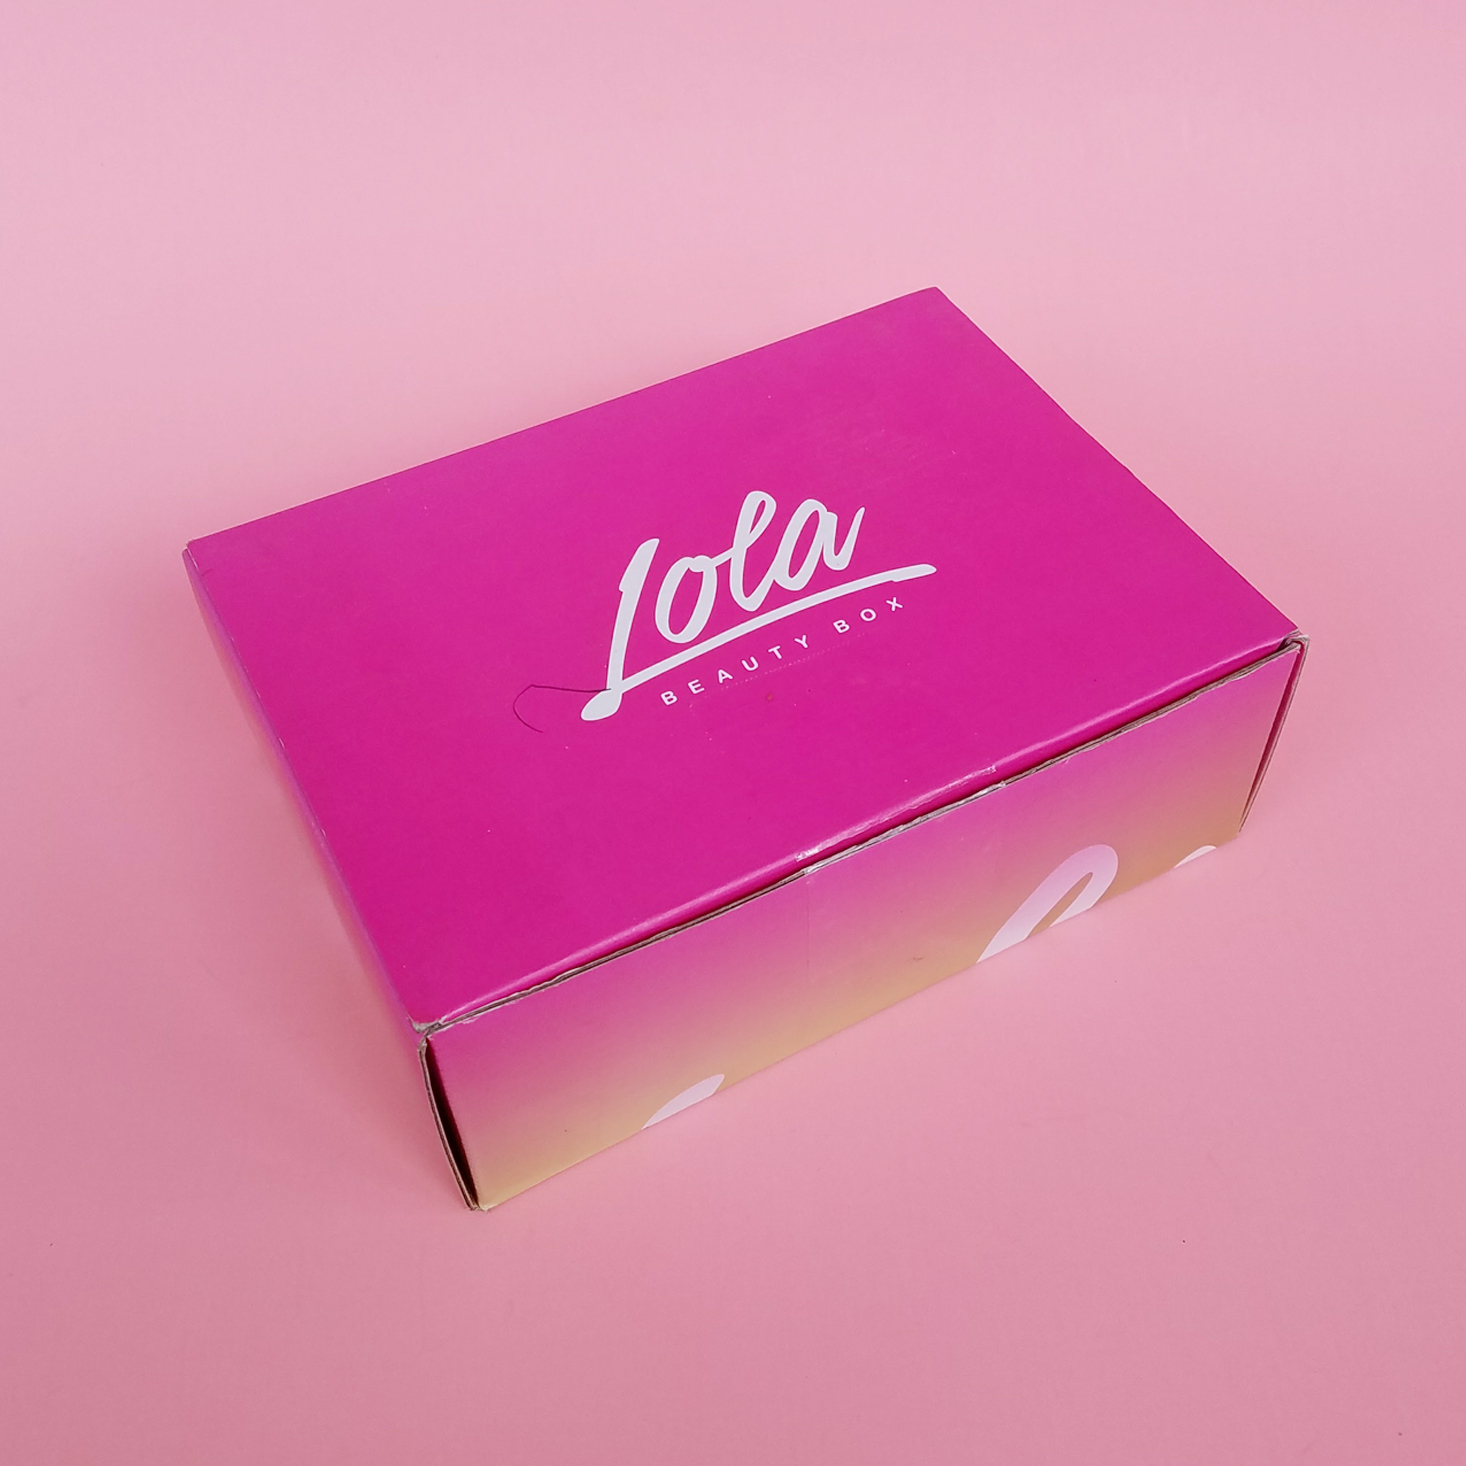 Lola Beauty Box Subscription Review – October 2017